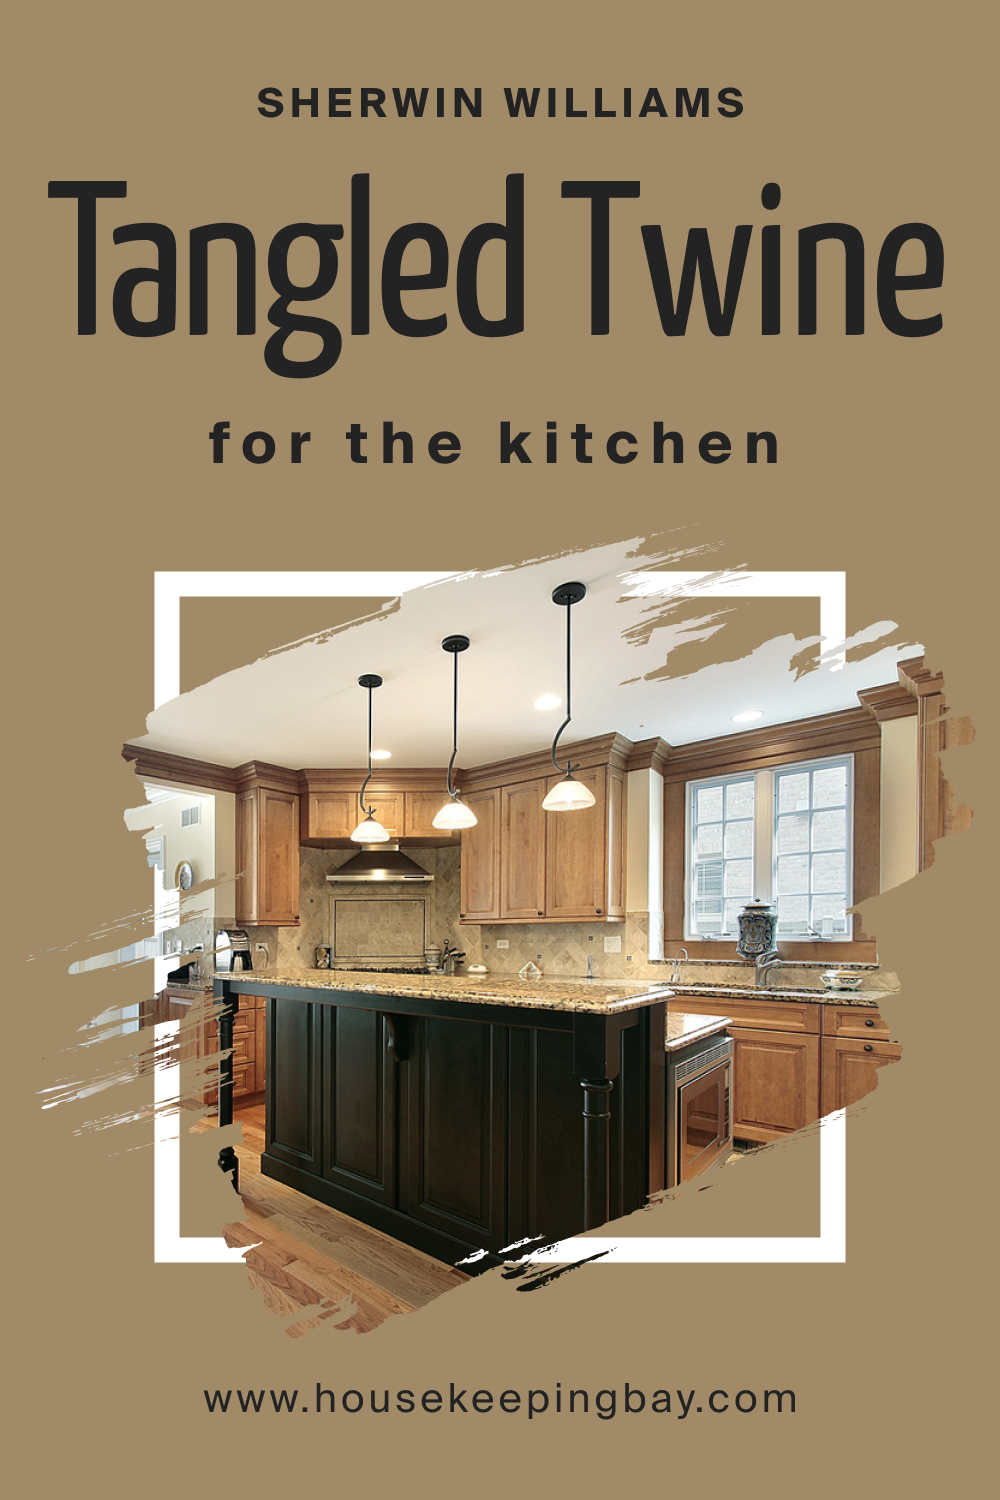 Sherwin Williams. SW 9538 Tangled Twine For the Kitchens